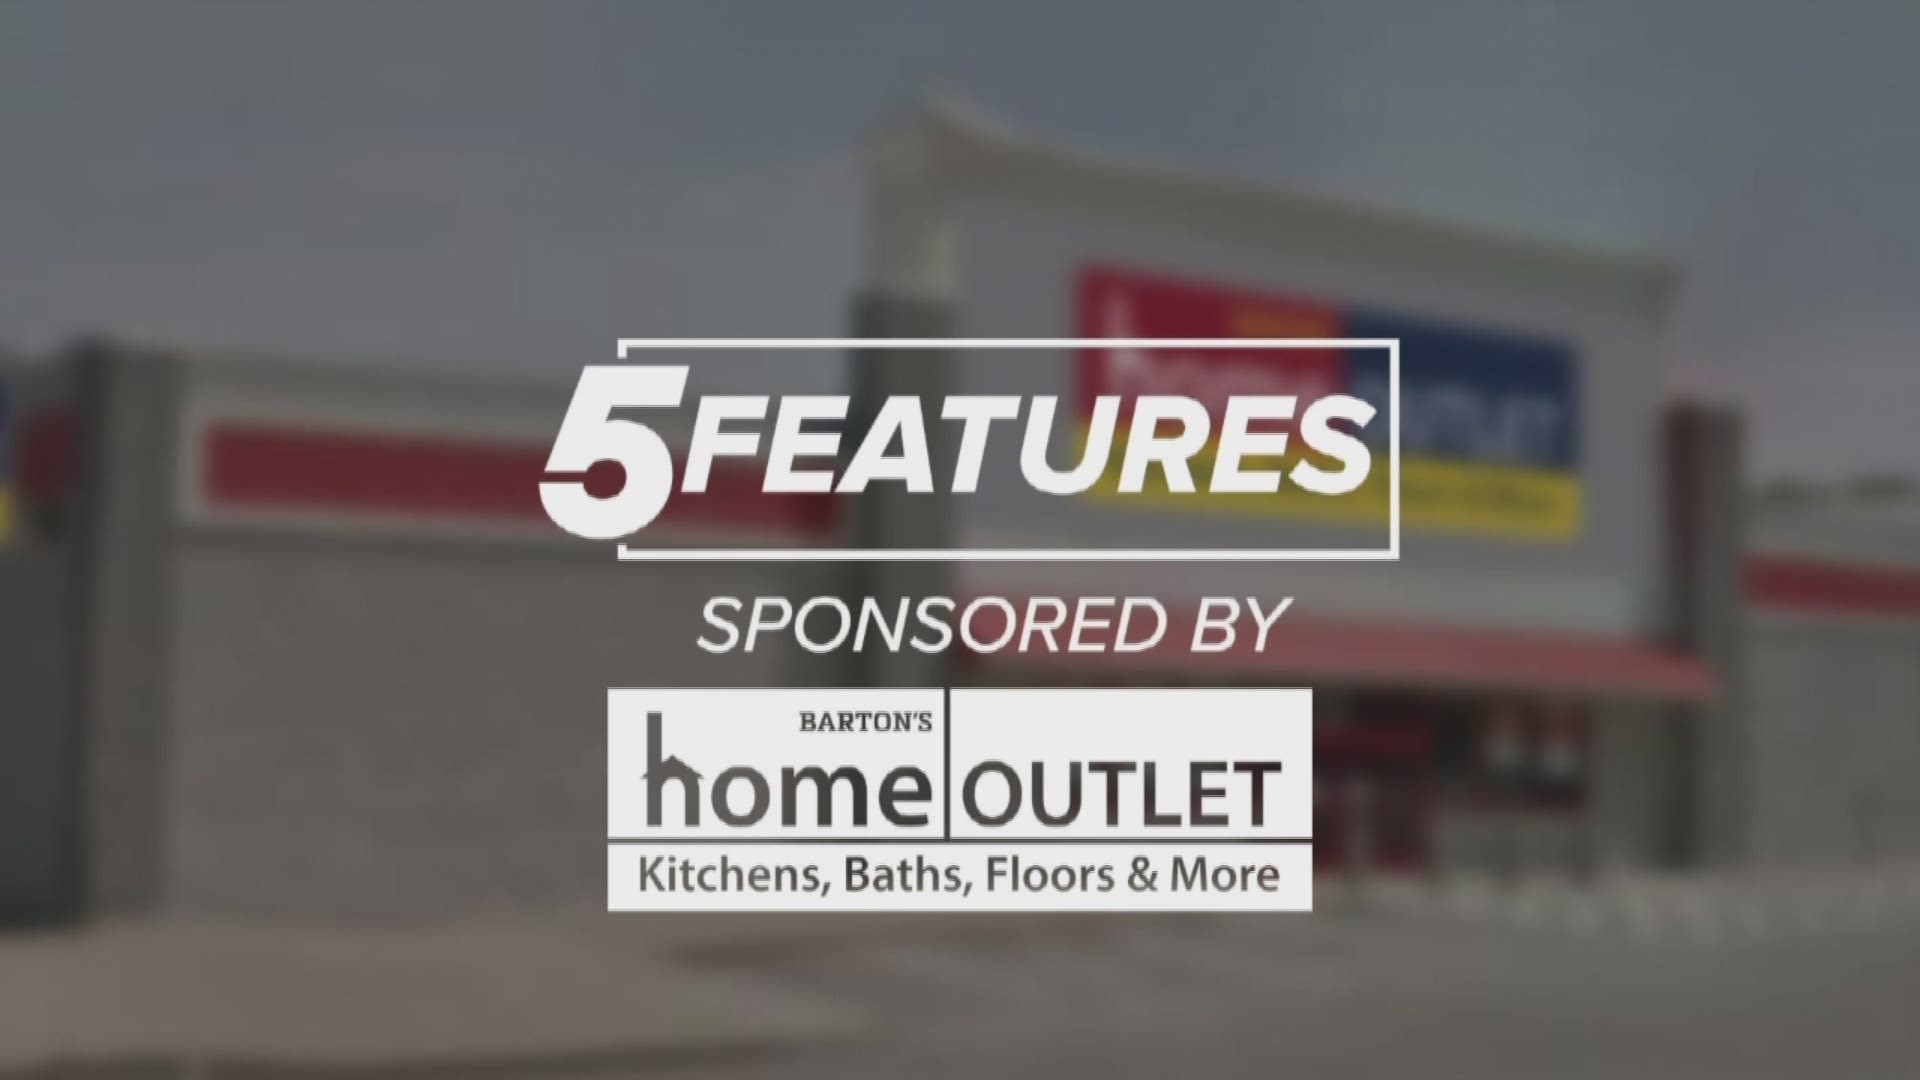 Sponsored by: Home Outlet